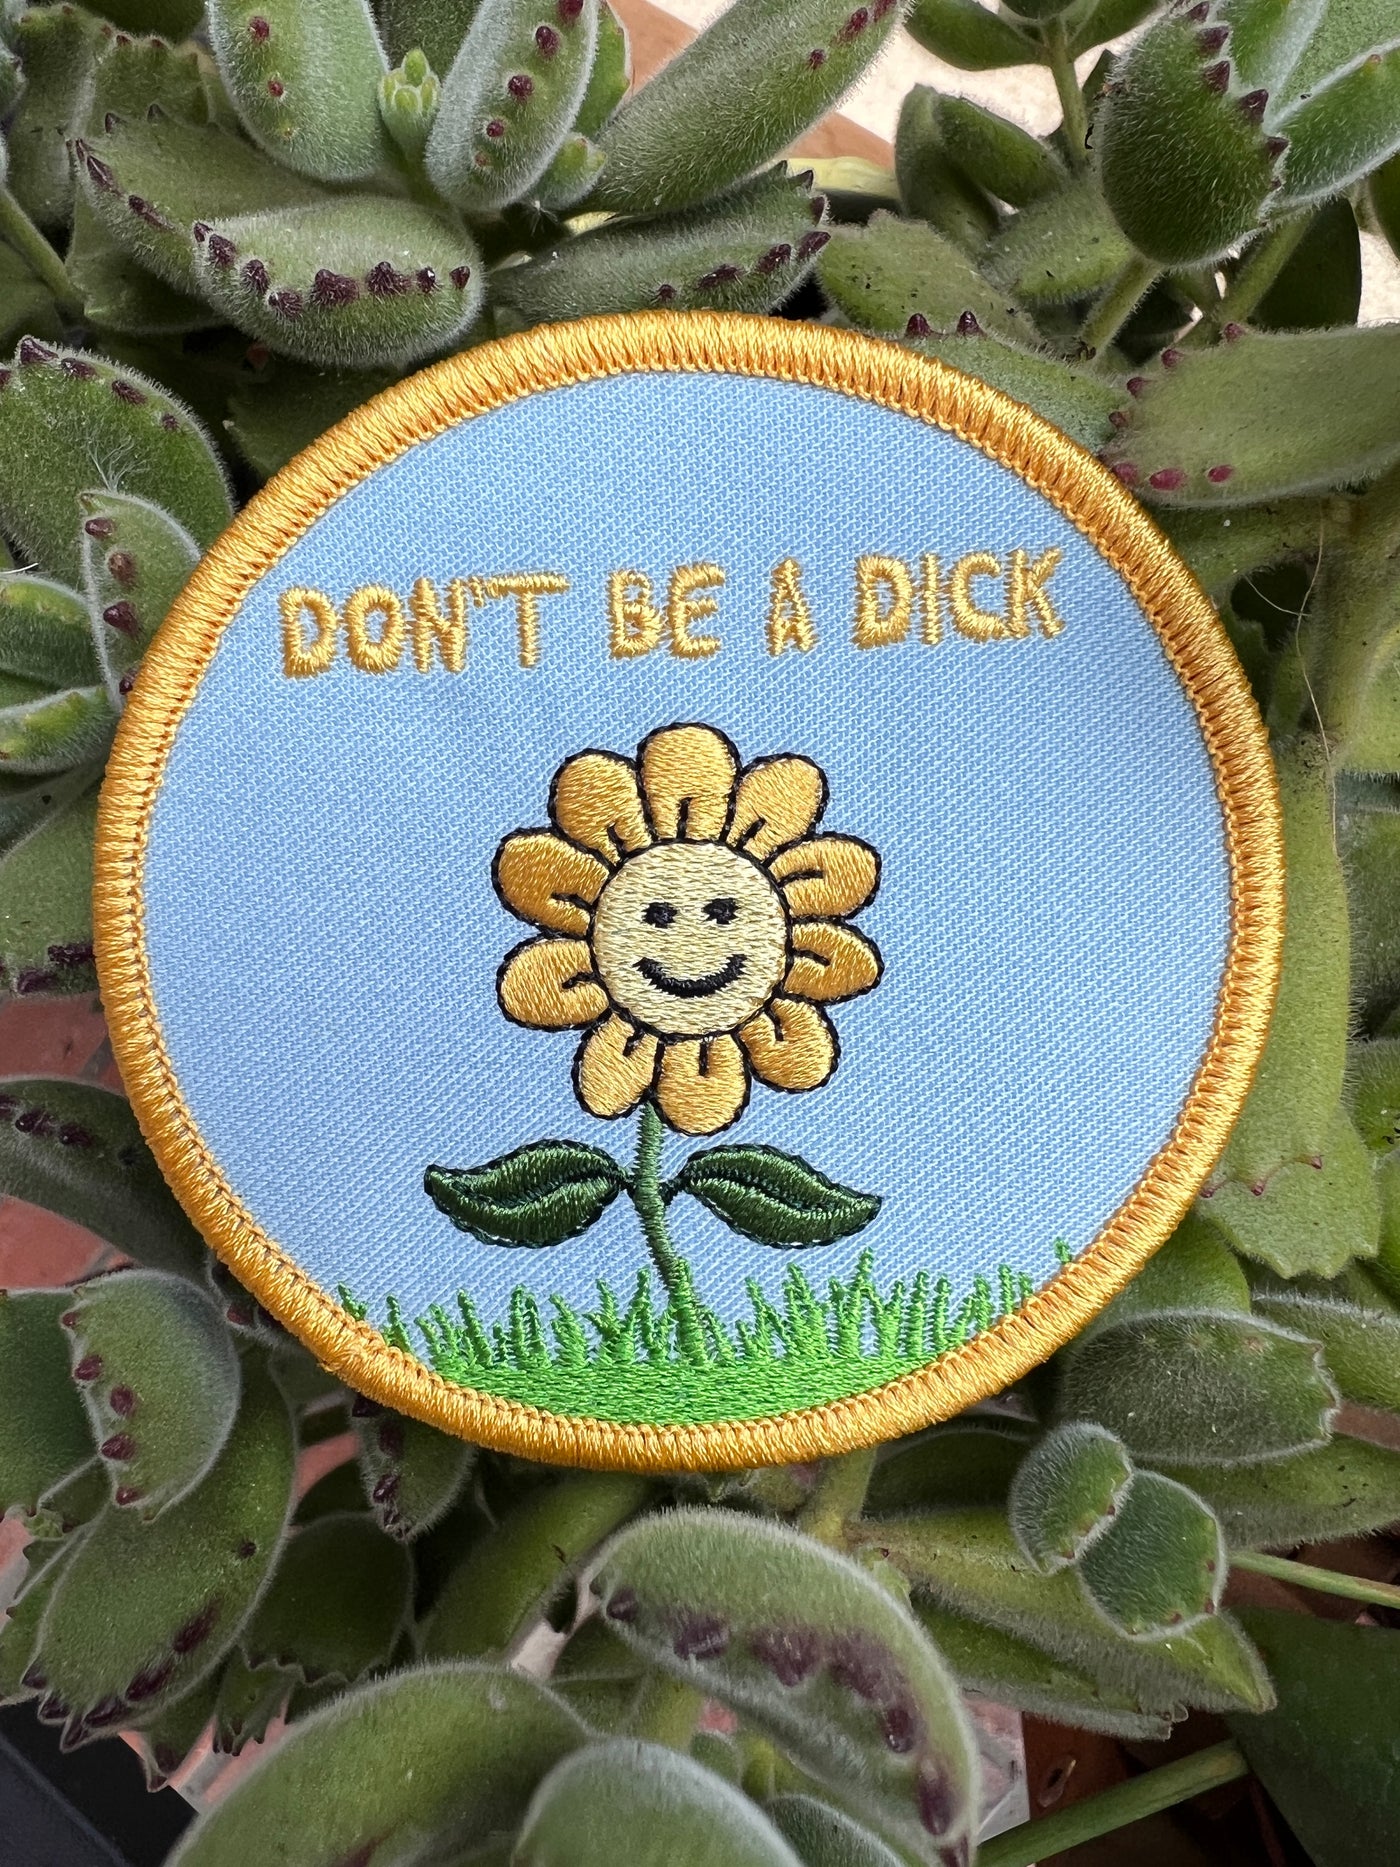 Don't Be a Dick Embroidered Patch